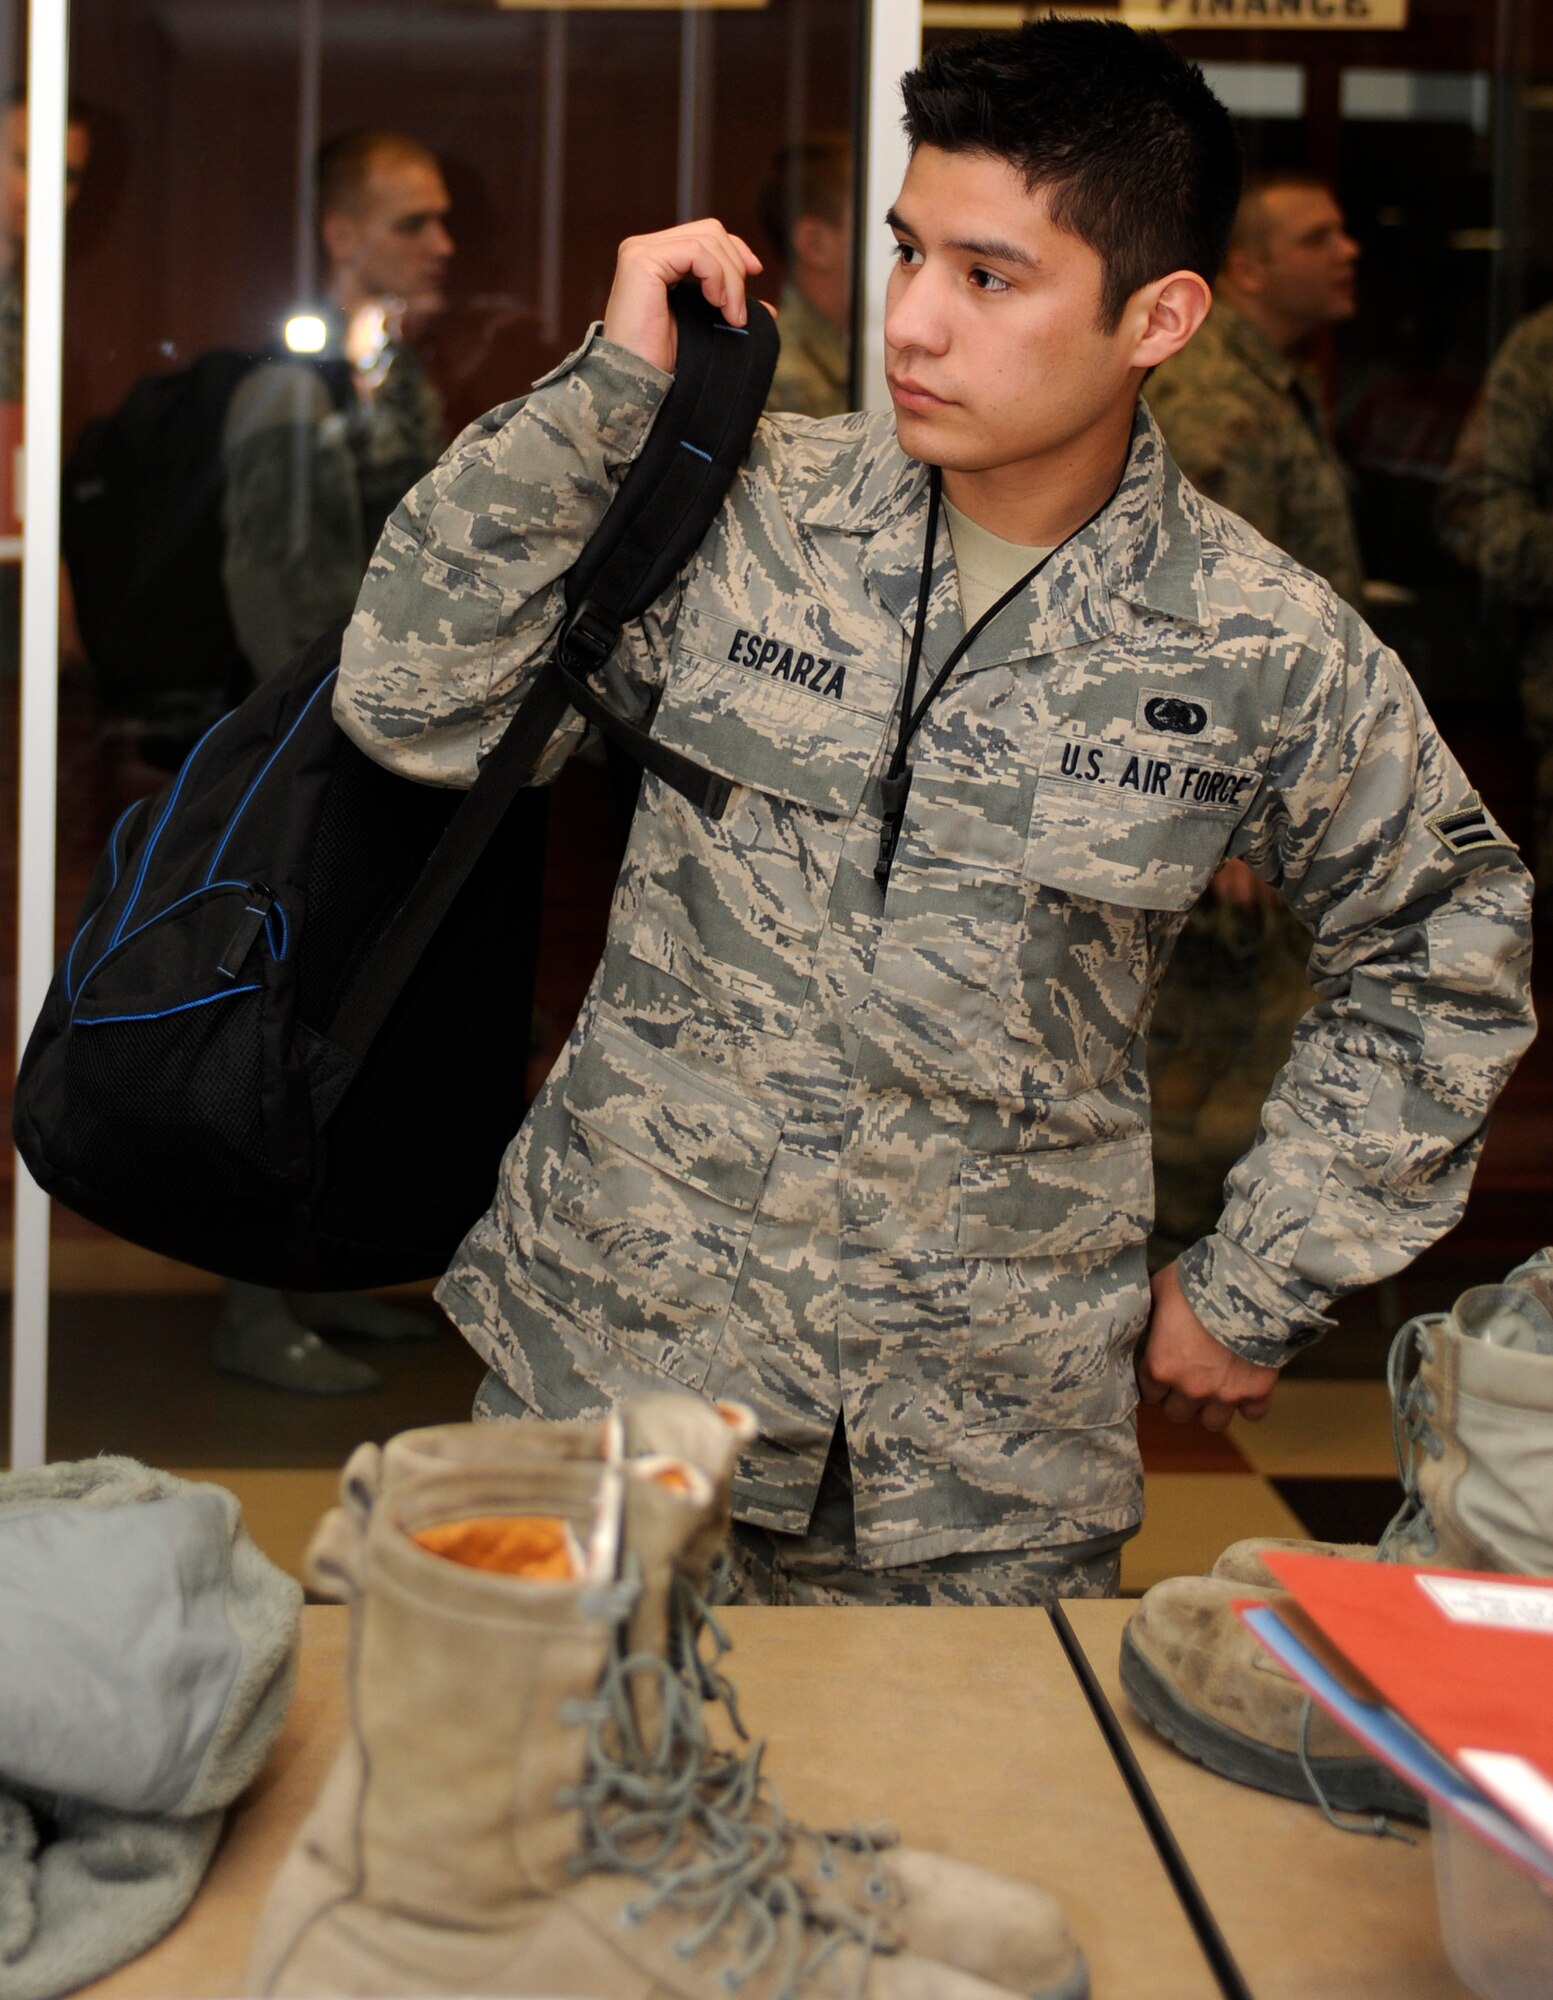 Airman 1st Class Kristopher Esparza, 28th Logistics Readiness Squadron Aircraft Parts Store technician, dons his backpack after it was X-rayed during a deployment readiness exercise at the Deployment Center on Ellsworth Air Force Base, S.D., Dec. 14, 2012. Esparza was one of approximately 164 Airmen who participated in the exercise hosted by the 28th LRS. (U.S. Air Force photo by Airman Ashley J. Woolridge/Released) 